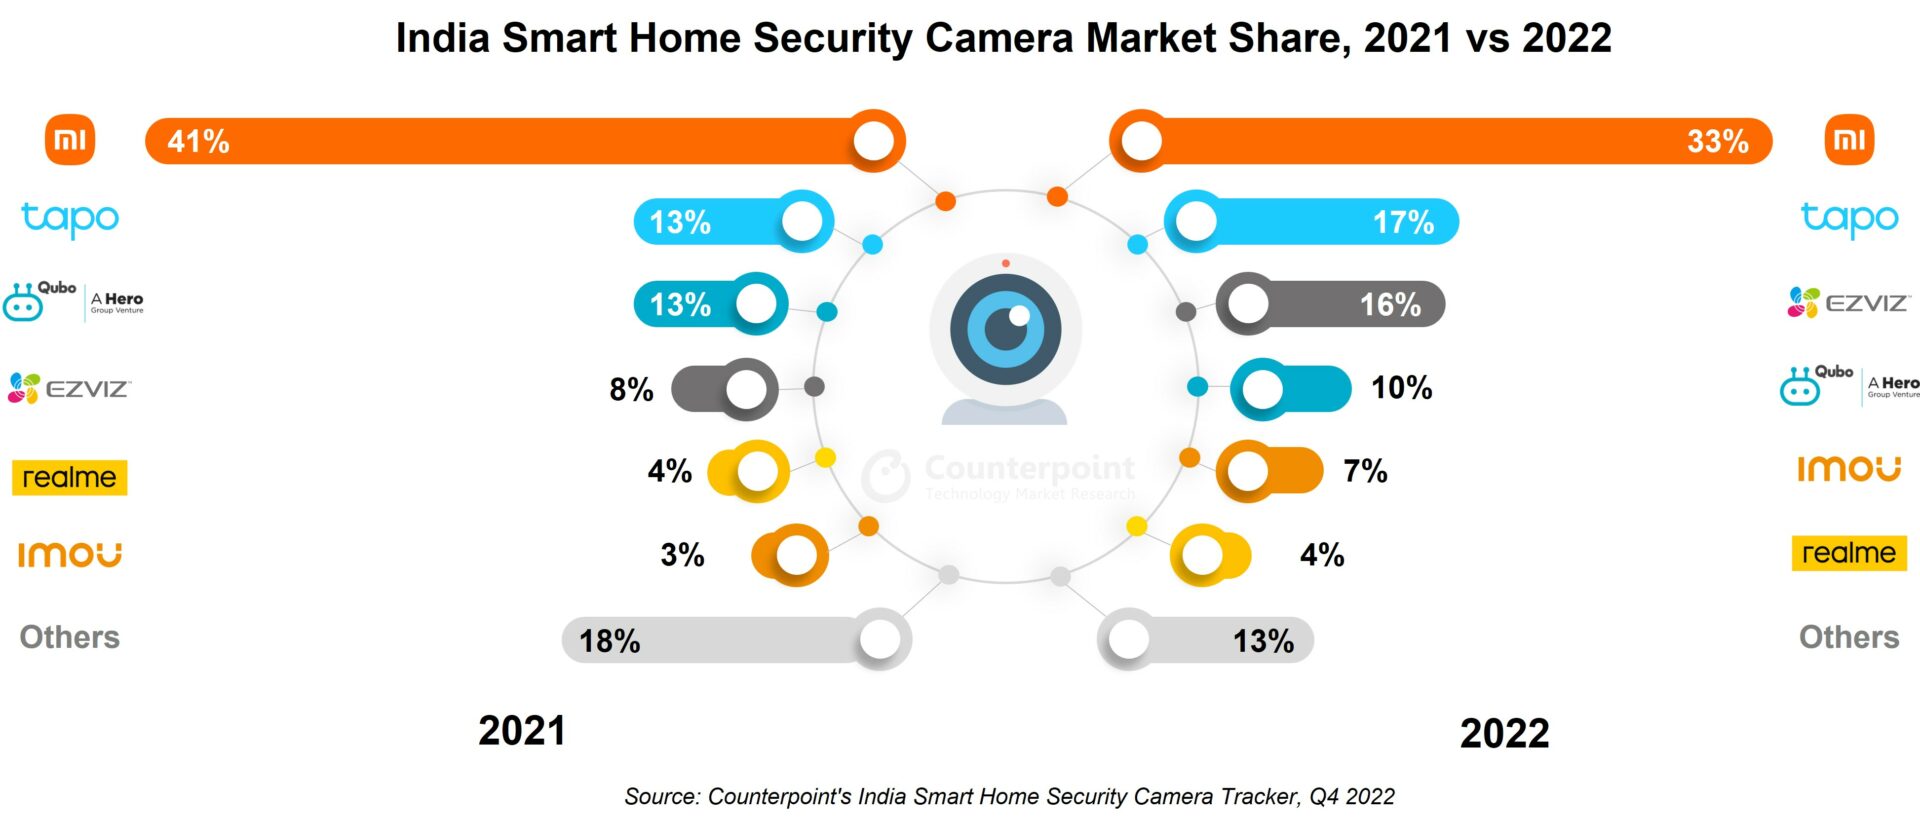 India Smart Home Security Camera Market Share, 2021 vs 2022, Counterpoint Research